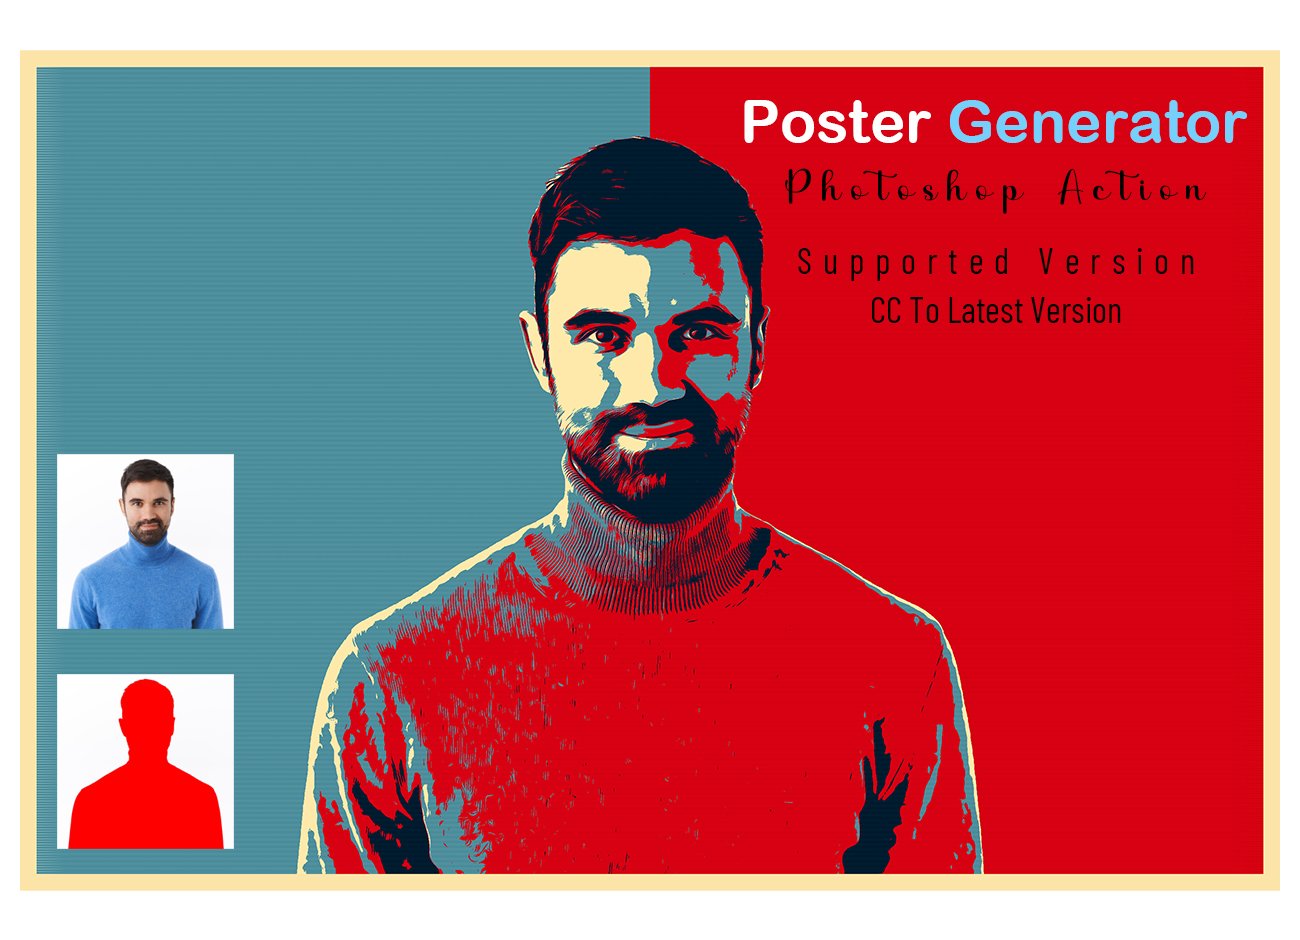 Poster Generator Photoshop Actioncover image.